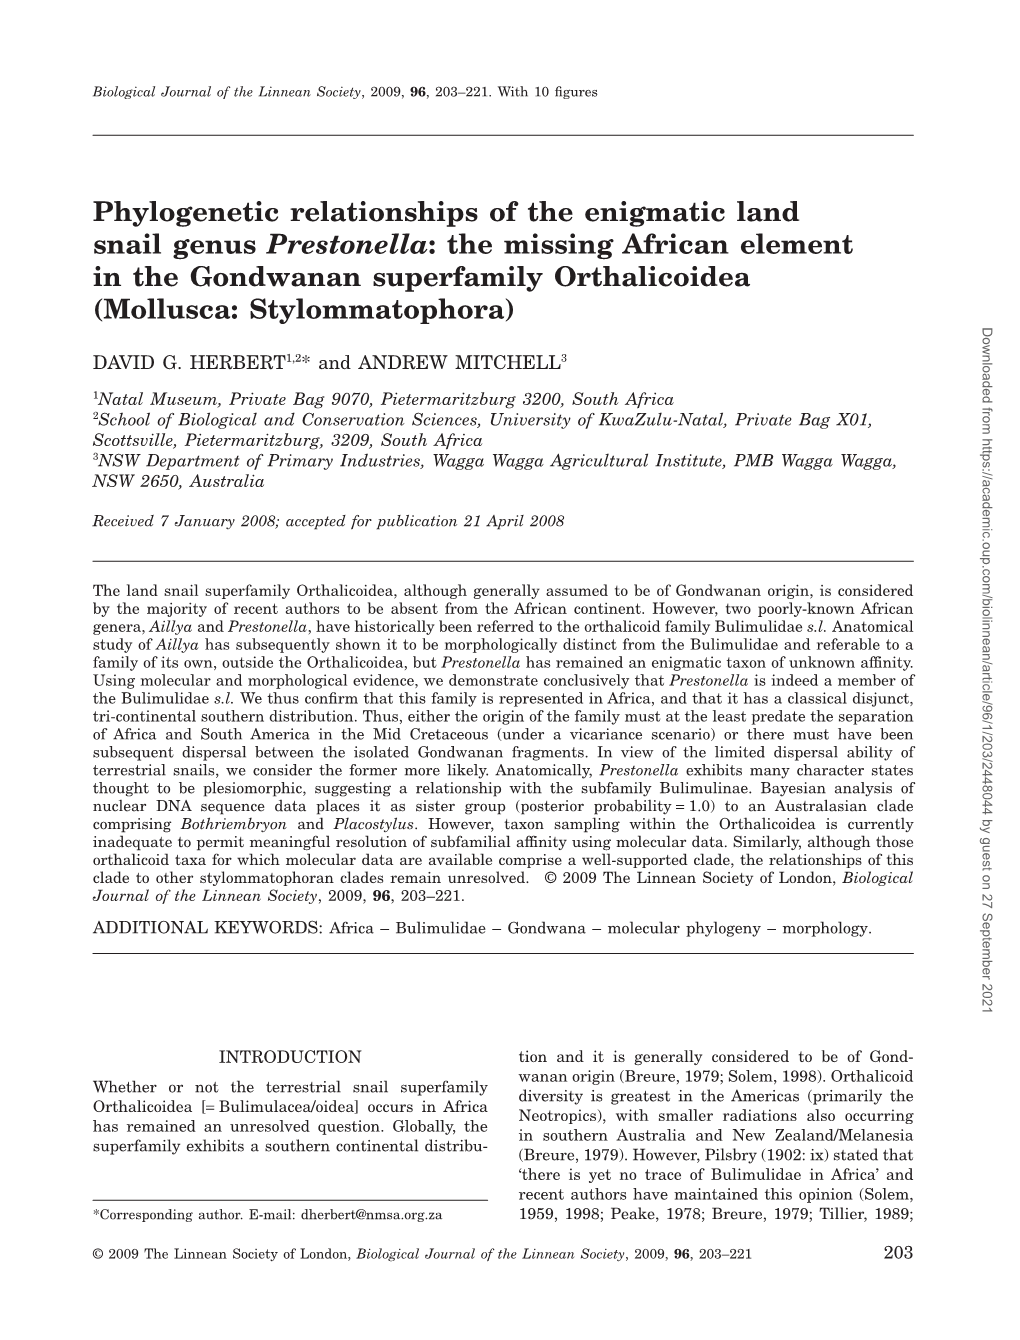 Phylogenetic Relationships of the Enigmatic Land Snail Genus